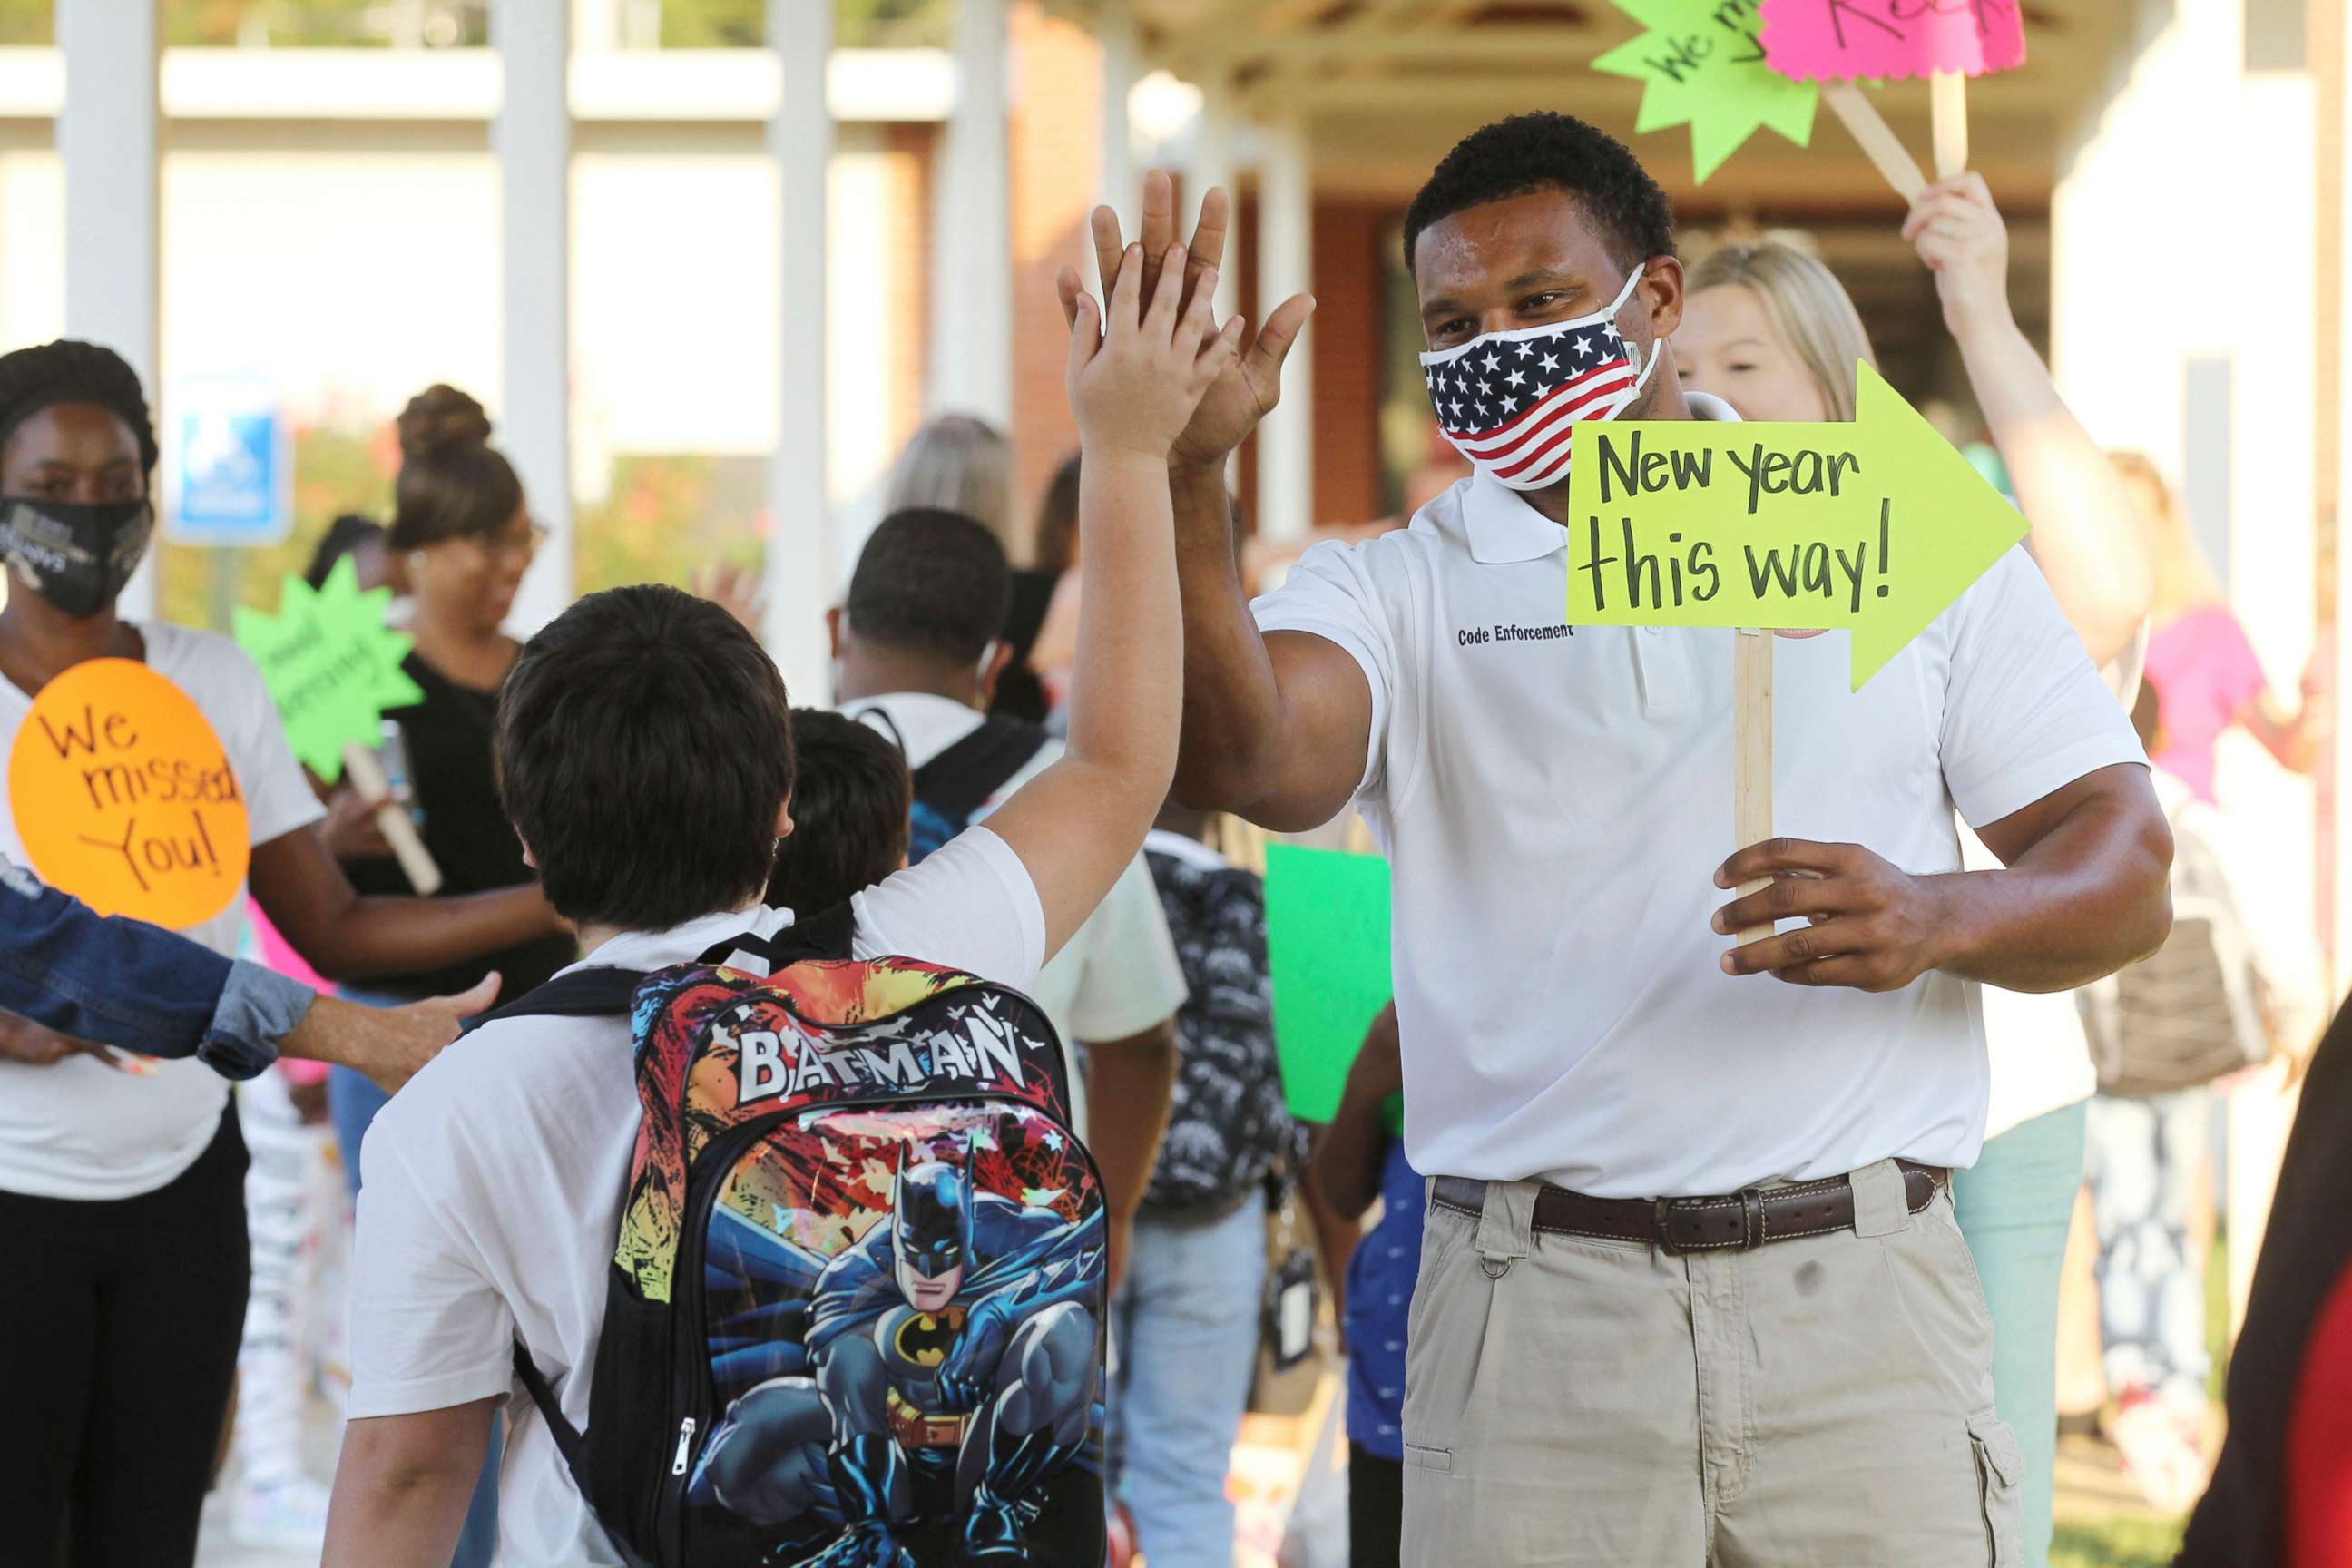 PHOTO: Shannon, Miss., Code Enforcement Officer Jeremandy Jackson gives a student a high five as parents, city officials, teachers and others welcome students back for the first day of school at Shannon Elementary School, Aug. 5, 2021.